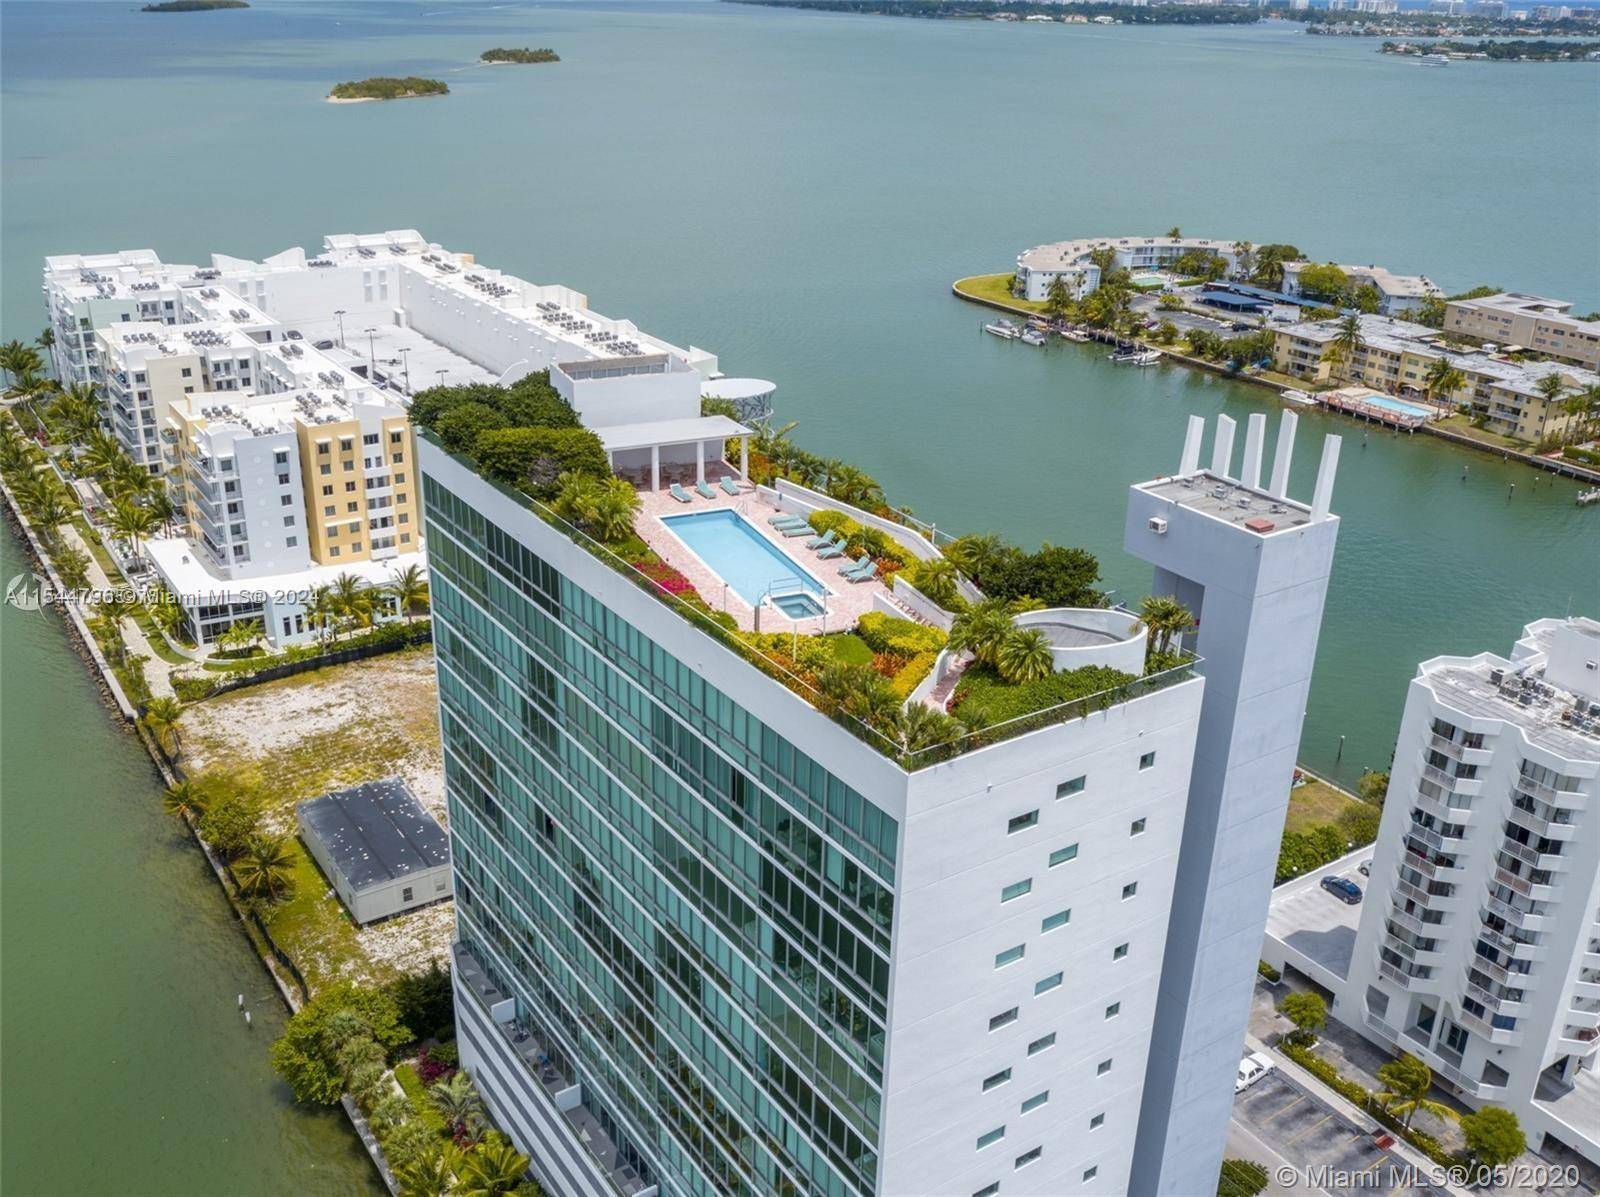 Embrace loft living in this sought after building with breathtaking bay views, dolphin sightings, and Miami's skyline.